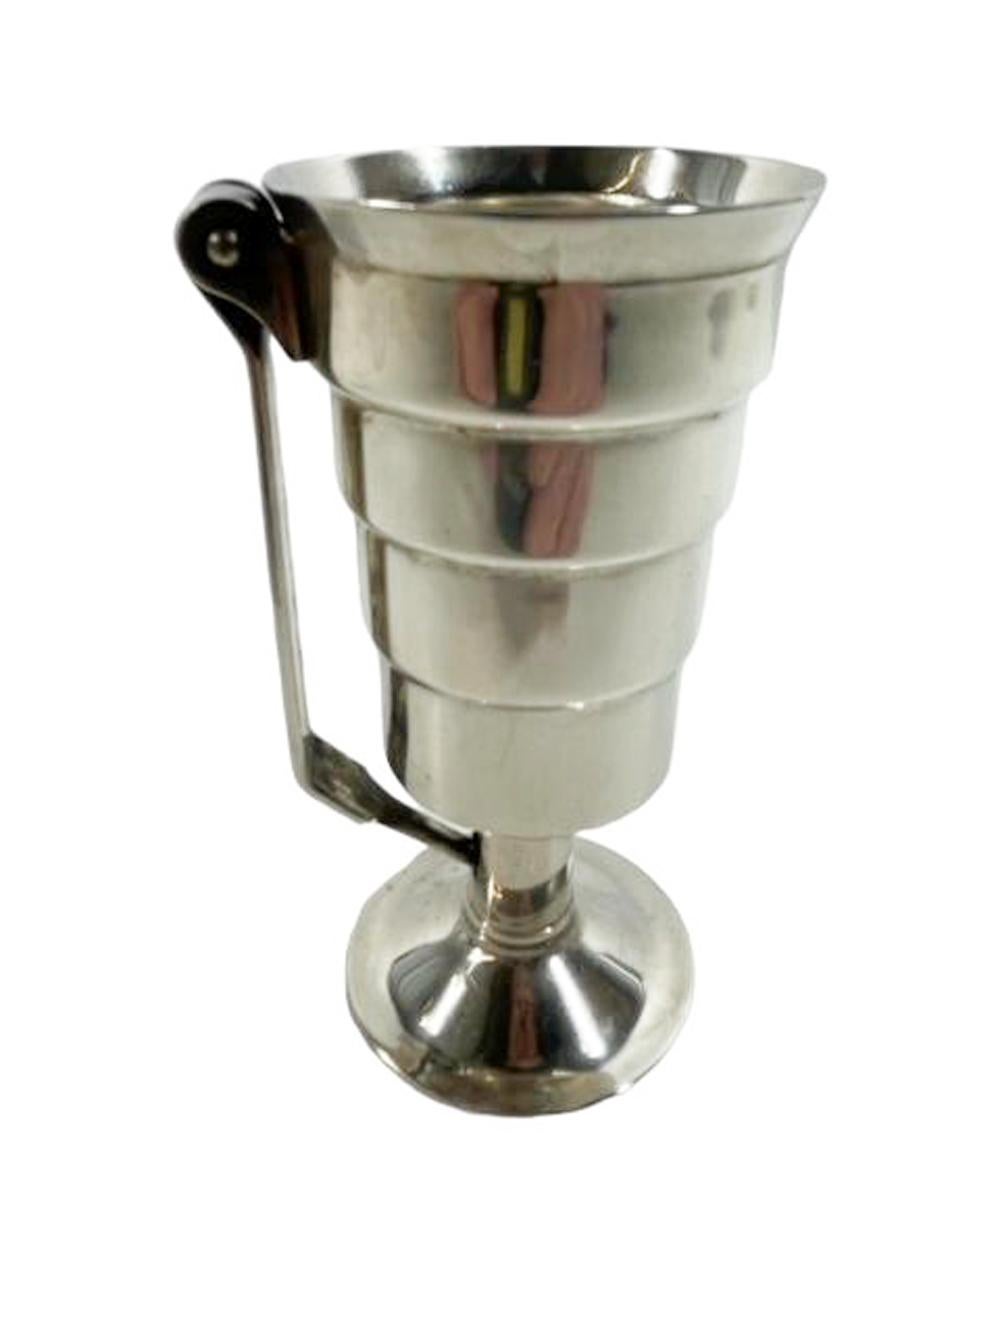 Art Deco Silver Plate Mechanical Spirit Measure / Jigger by Napier In Good Condition For Sale In Chapel Hill, NC